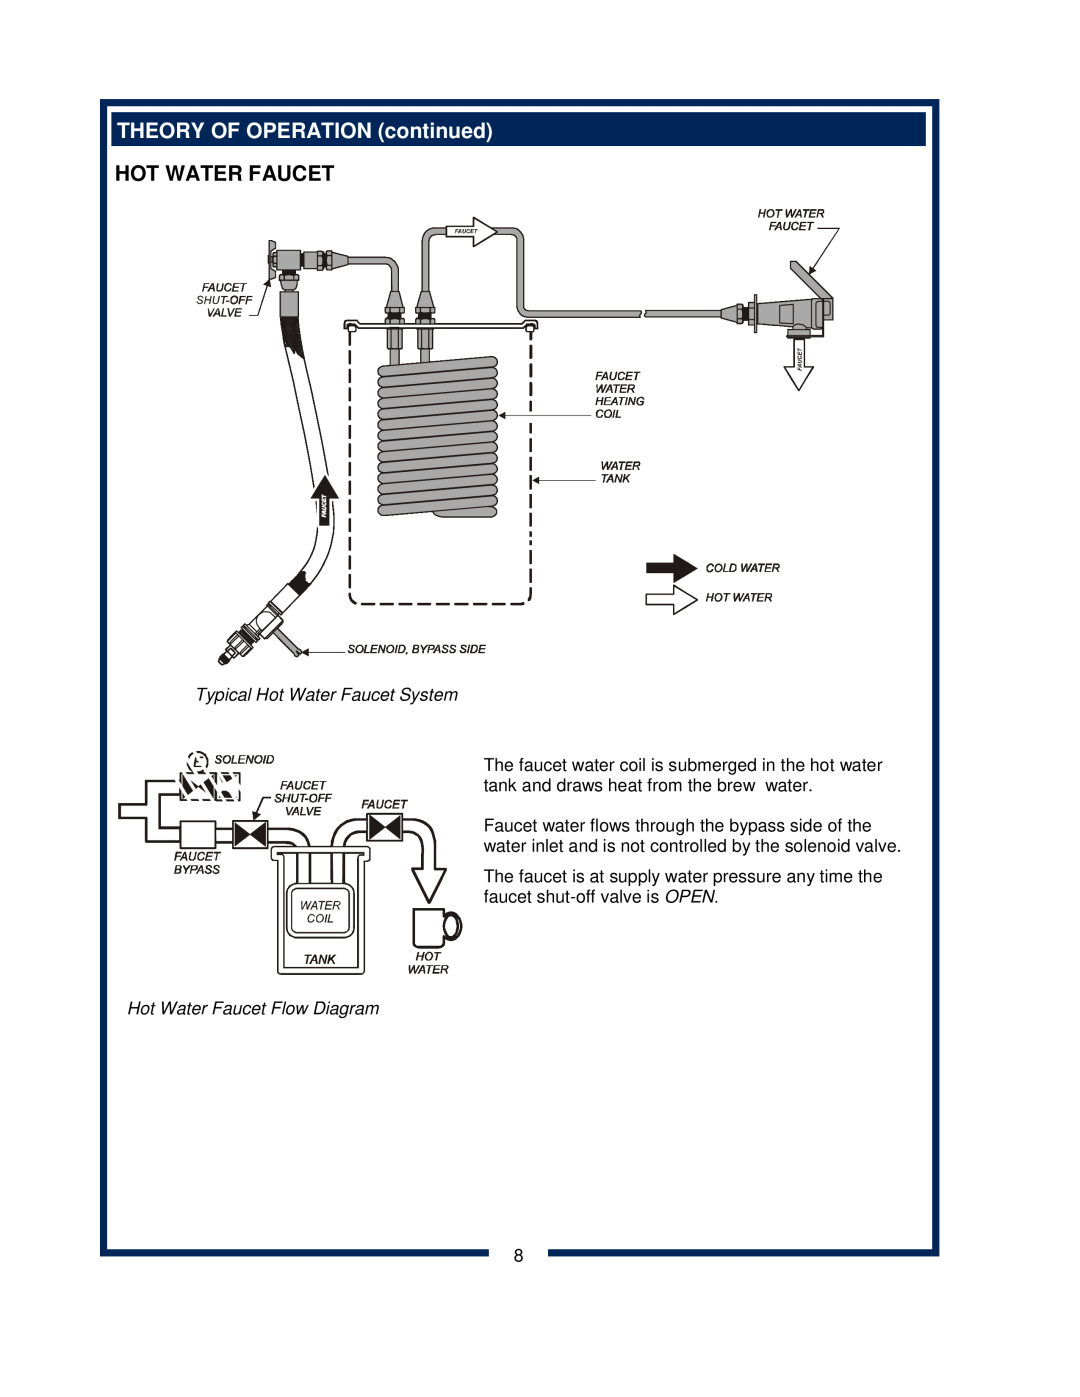 Bloomfield 600 manual THEORY OF OPERATION continued, Typical Hot Water Faucet System, Hot Water Faucet Flow Diagram 